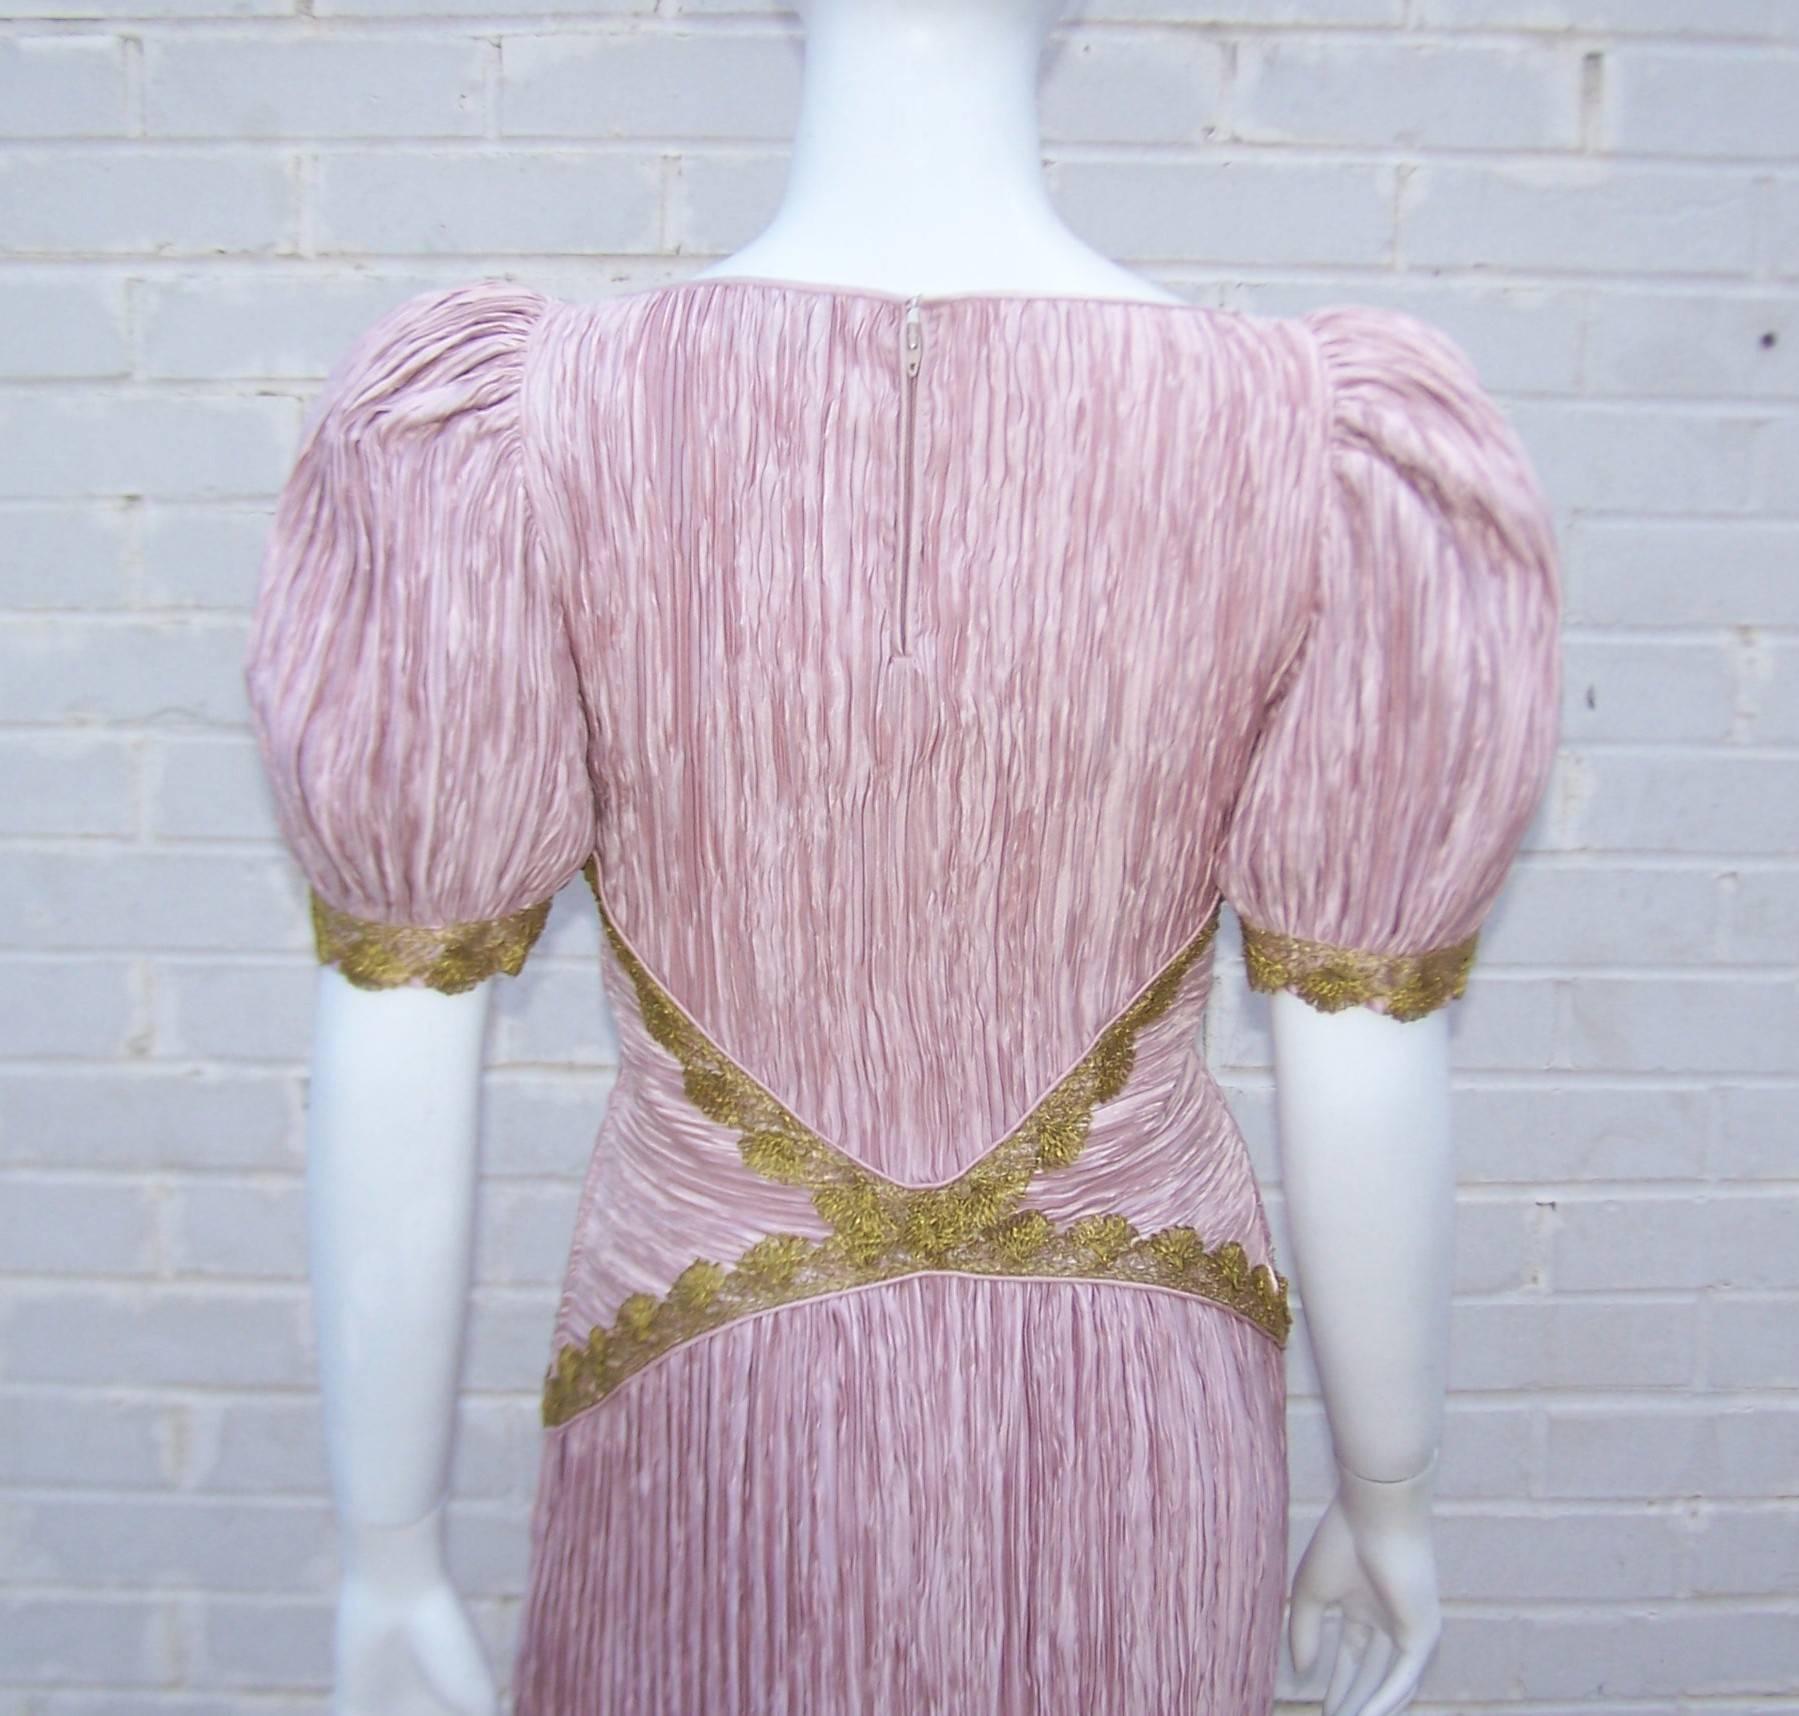 Heavenly 1980's Mary McFadden Pink Goddess Dress With Gold Braid 3